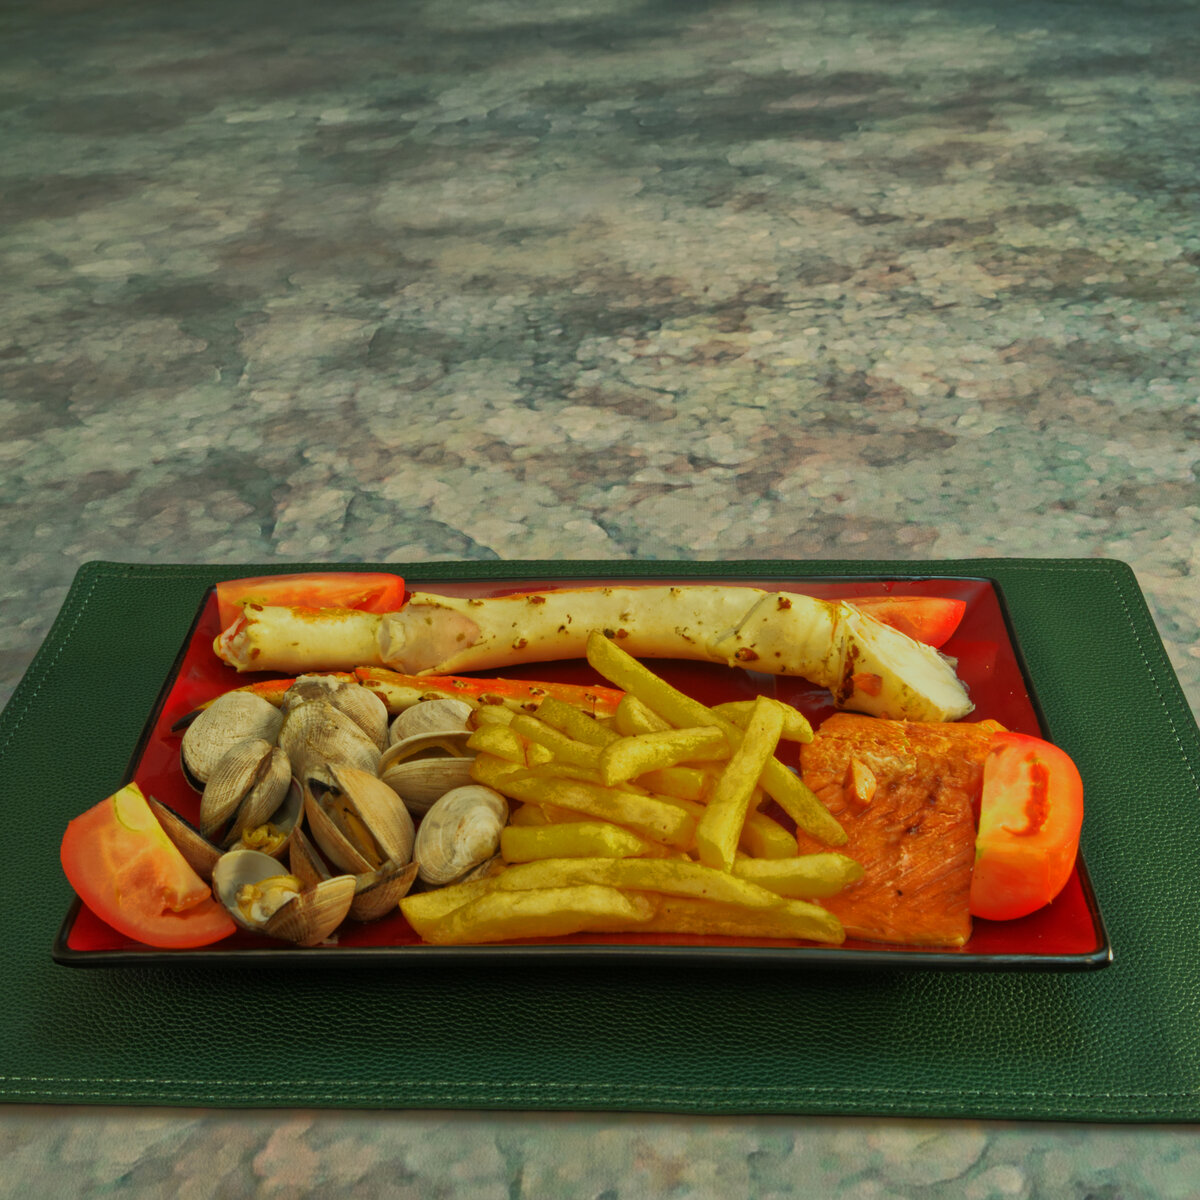 Seafood Plate - Salmon, Manila Clams, King Crab and French Fries